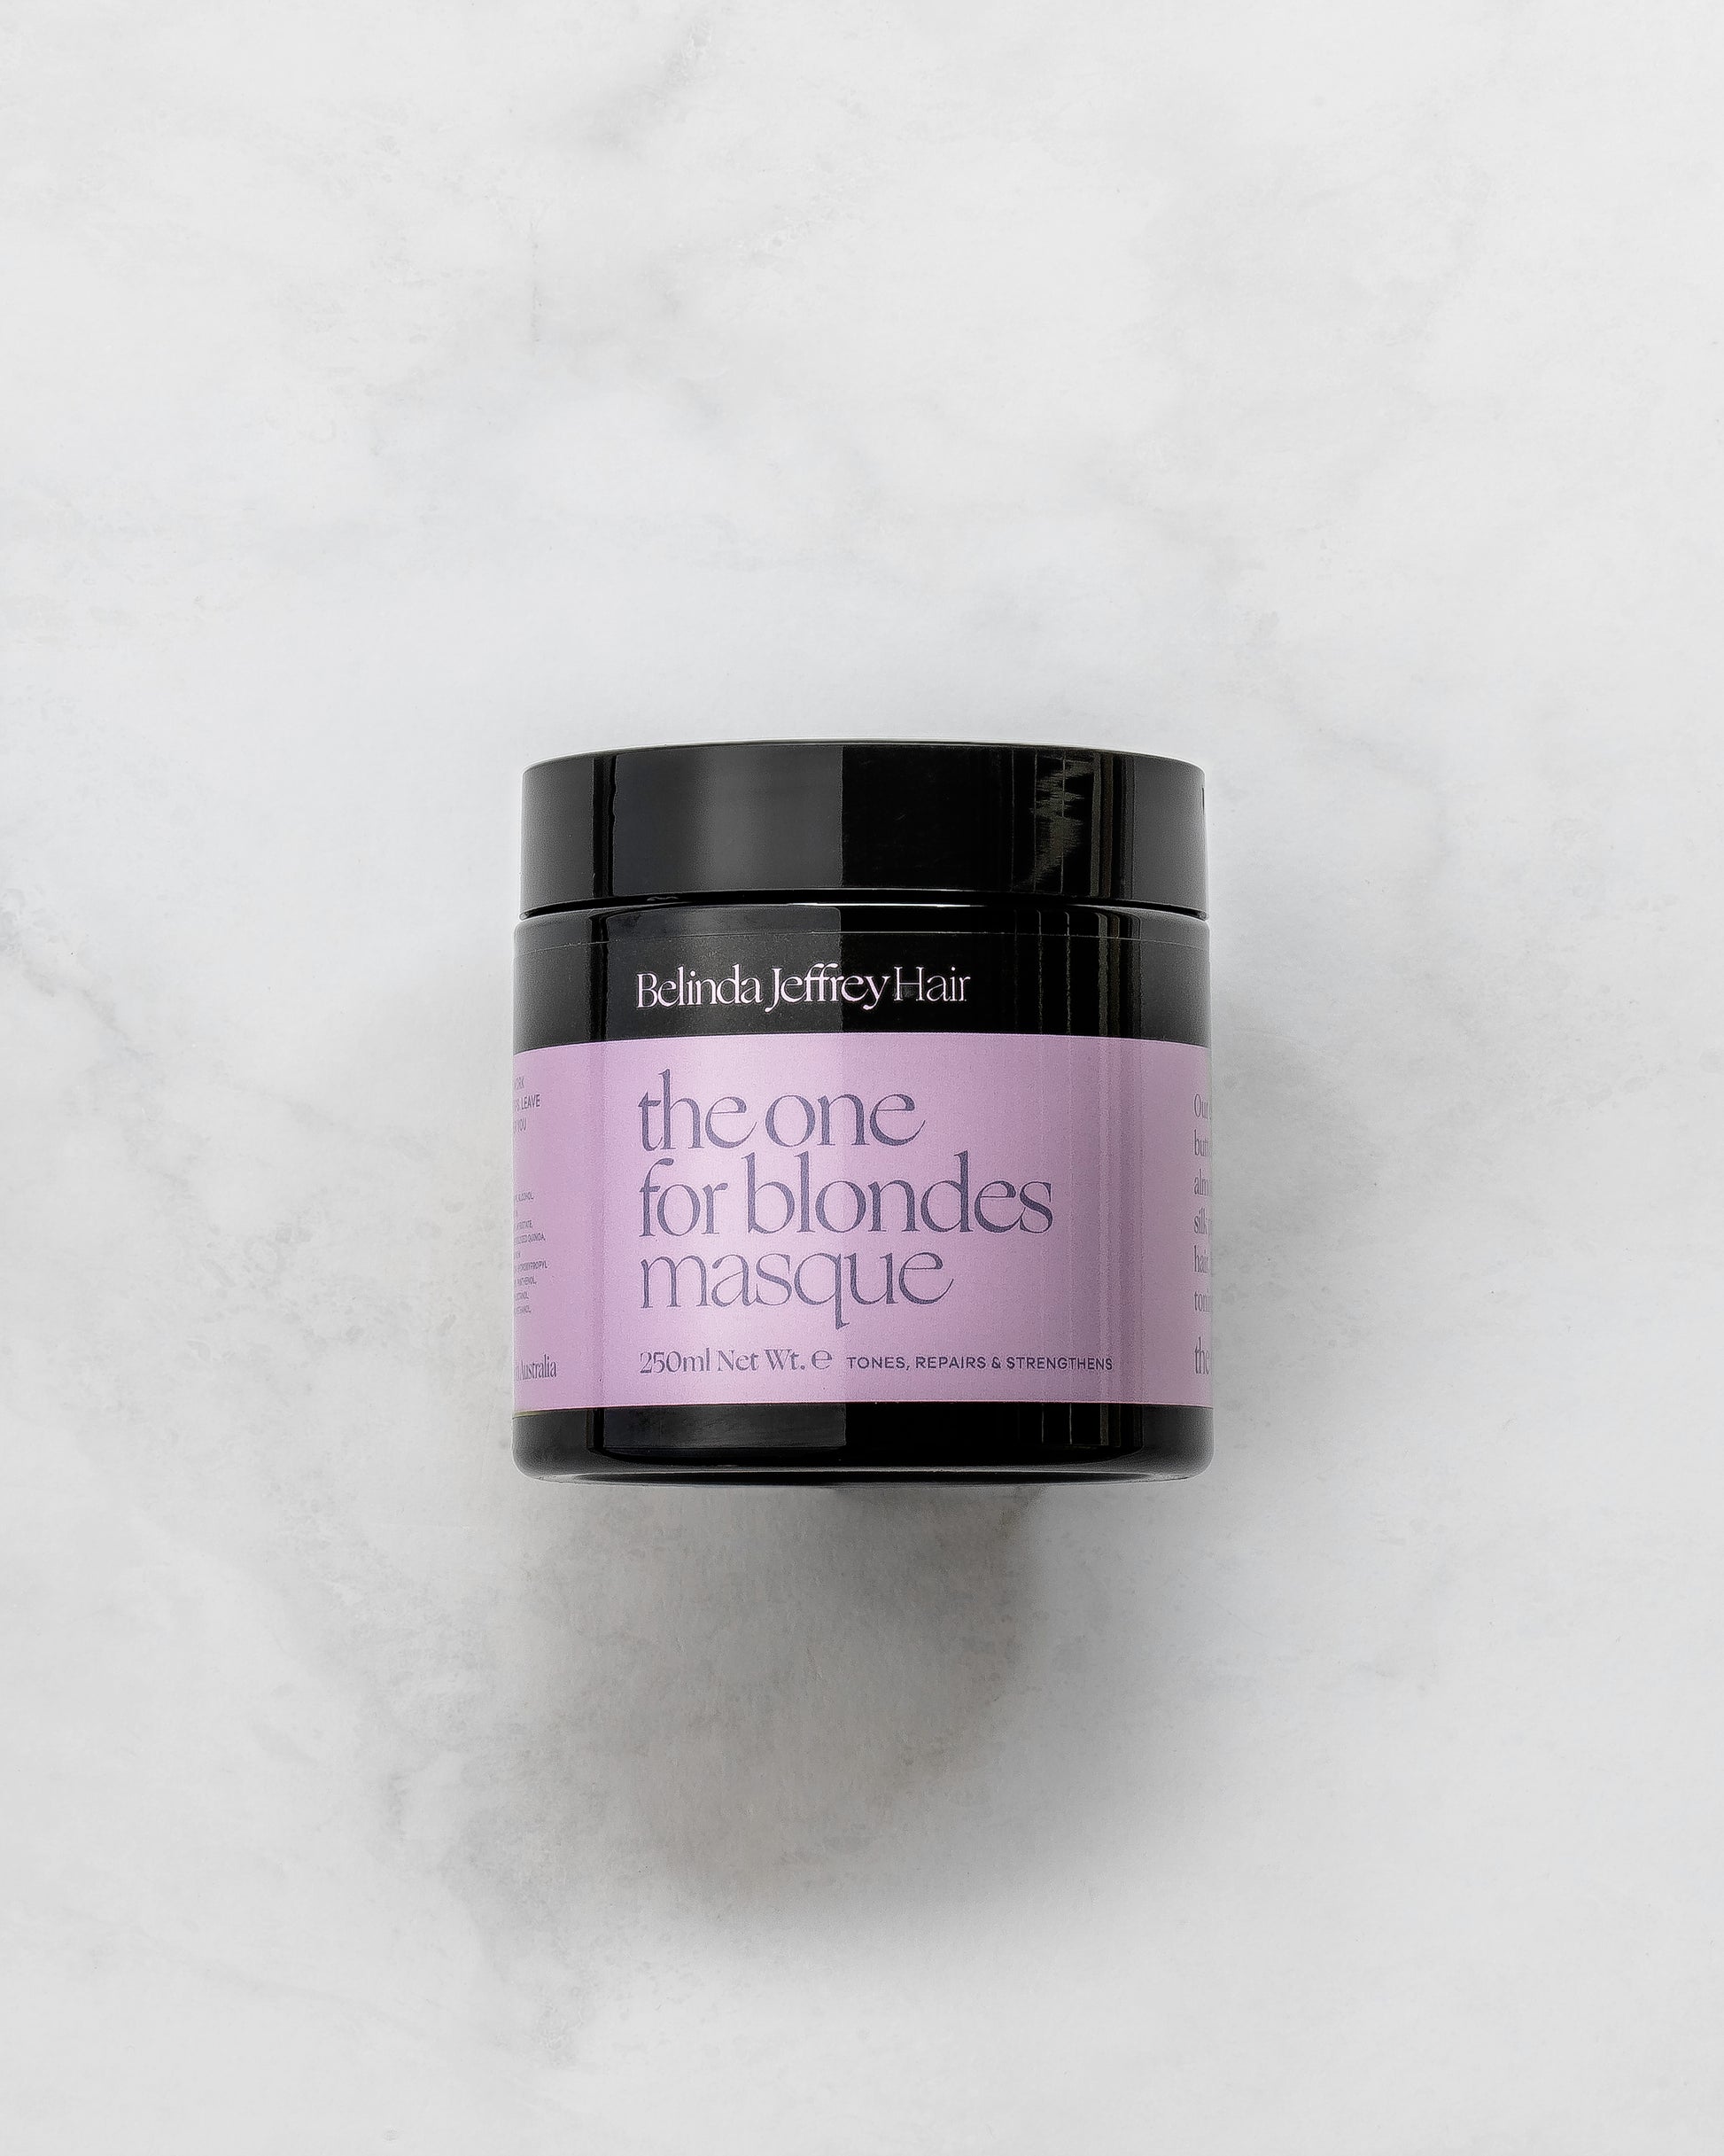 The one for blondes hair masque by Belinda Jeffrey Hair. Black jar with lid and pink label.